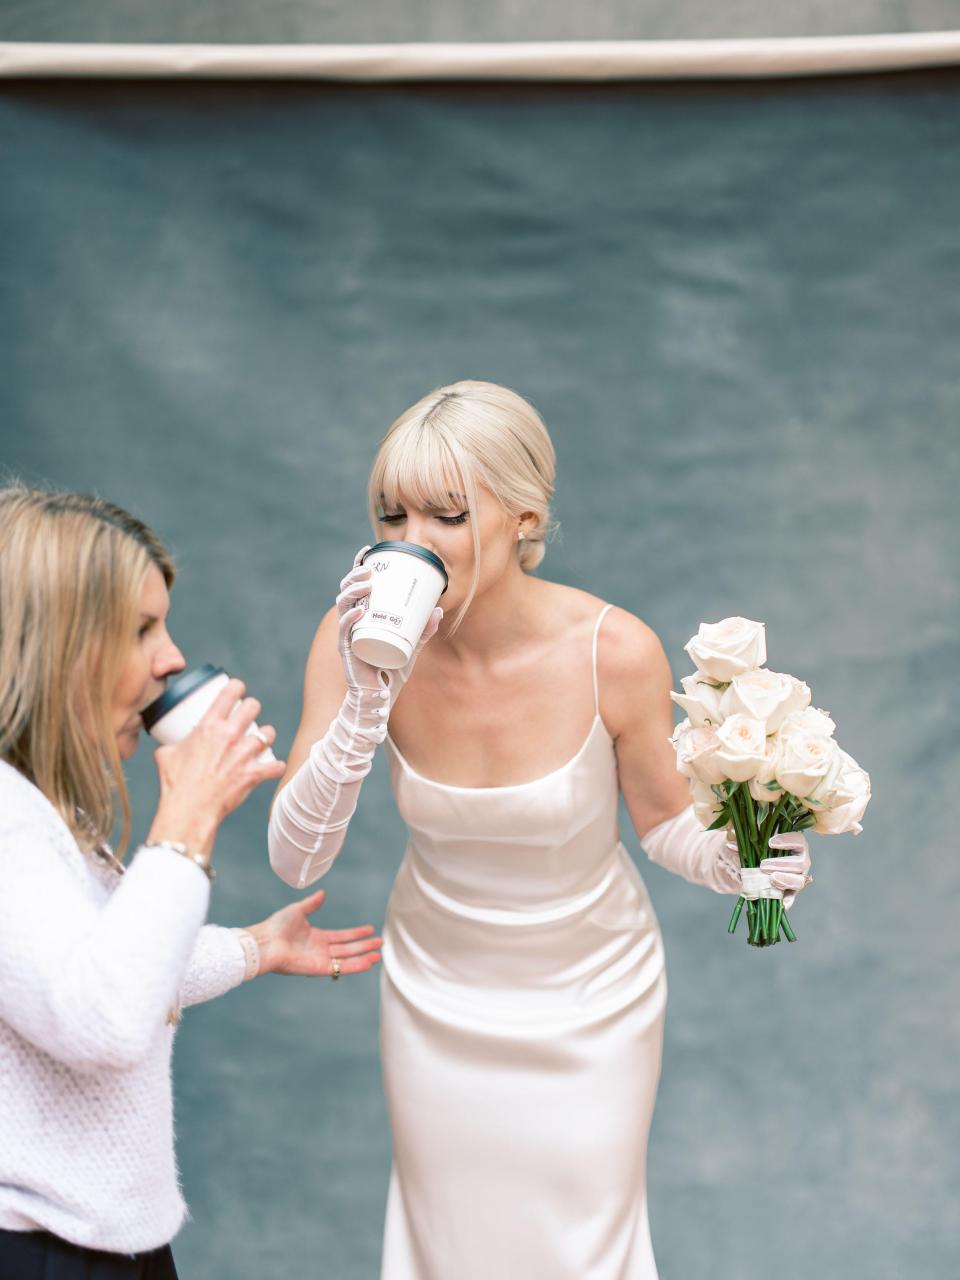 A bride drinks a cup of coffee in her wedding dress while holding a bouquet of flowers in her other hand.